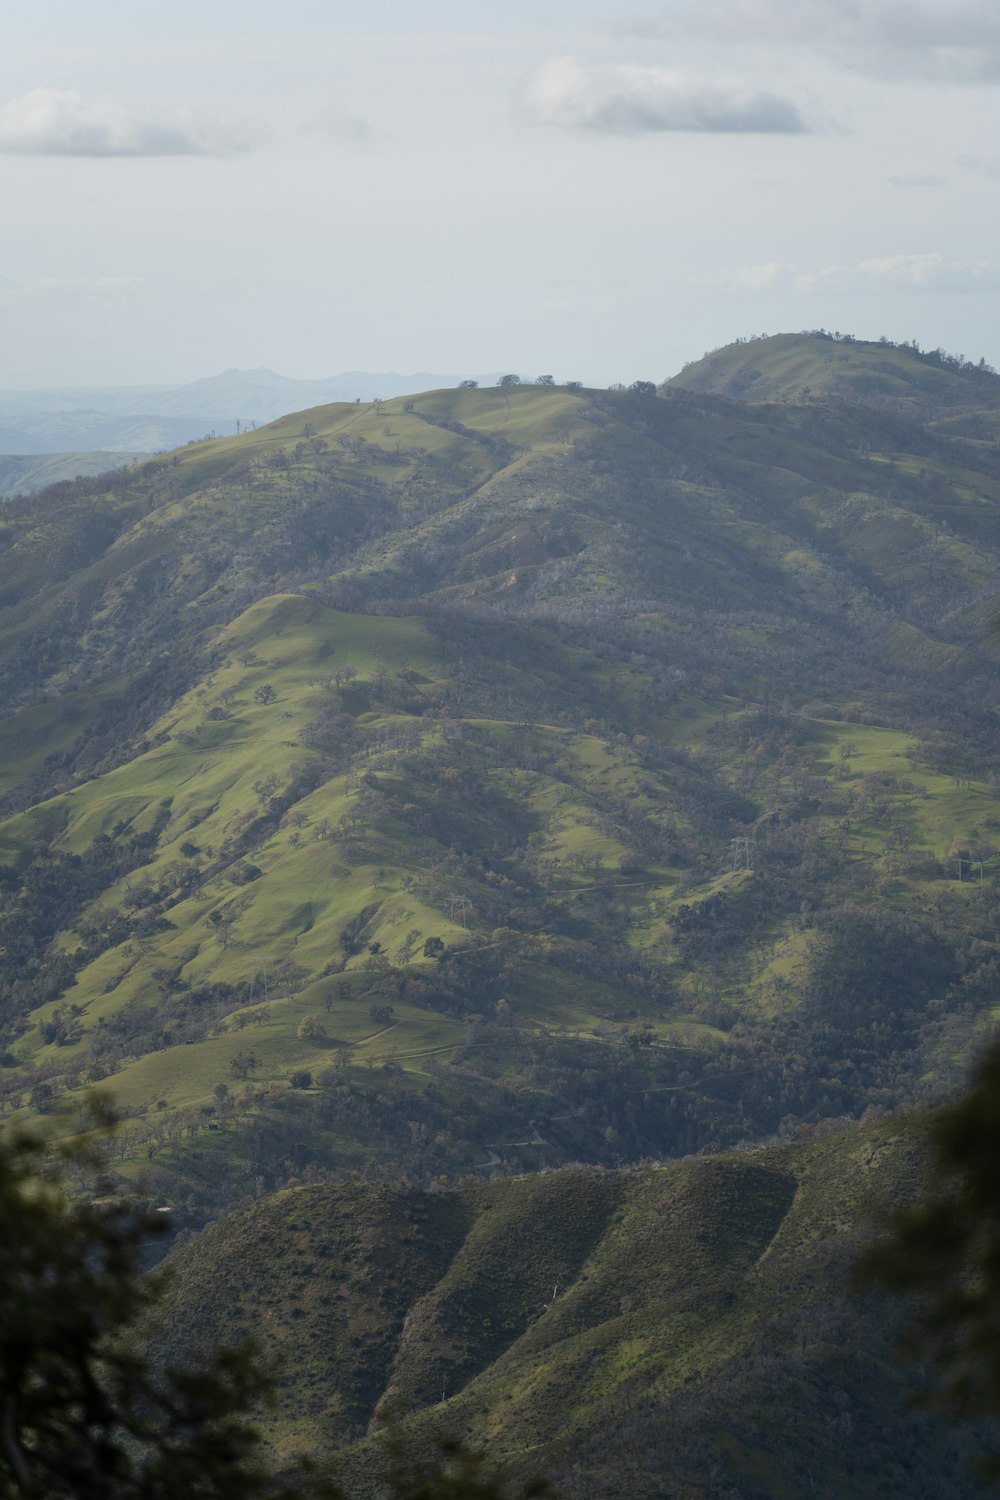 a view of a green mountain with trees on the side